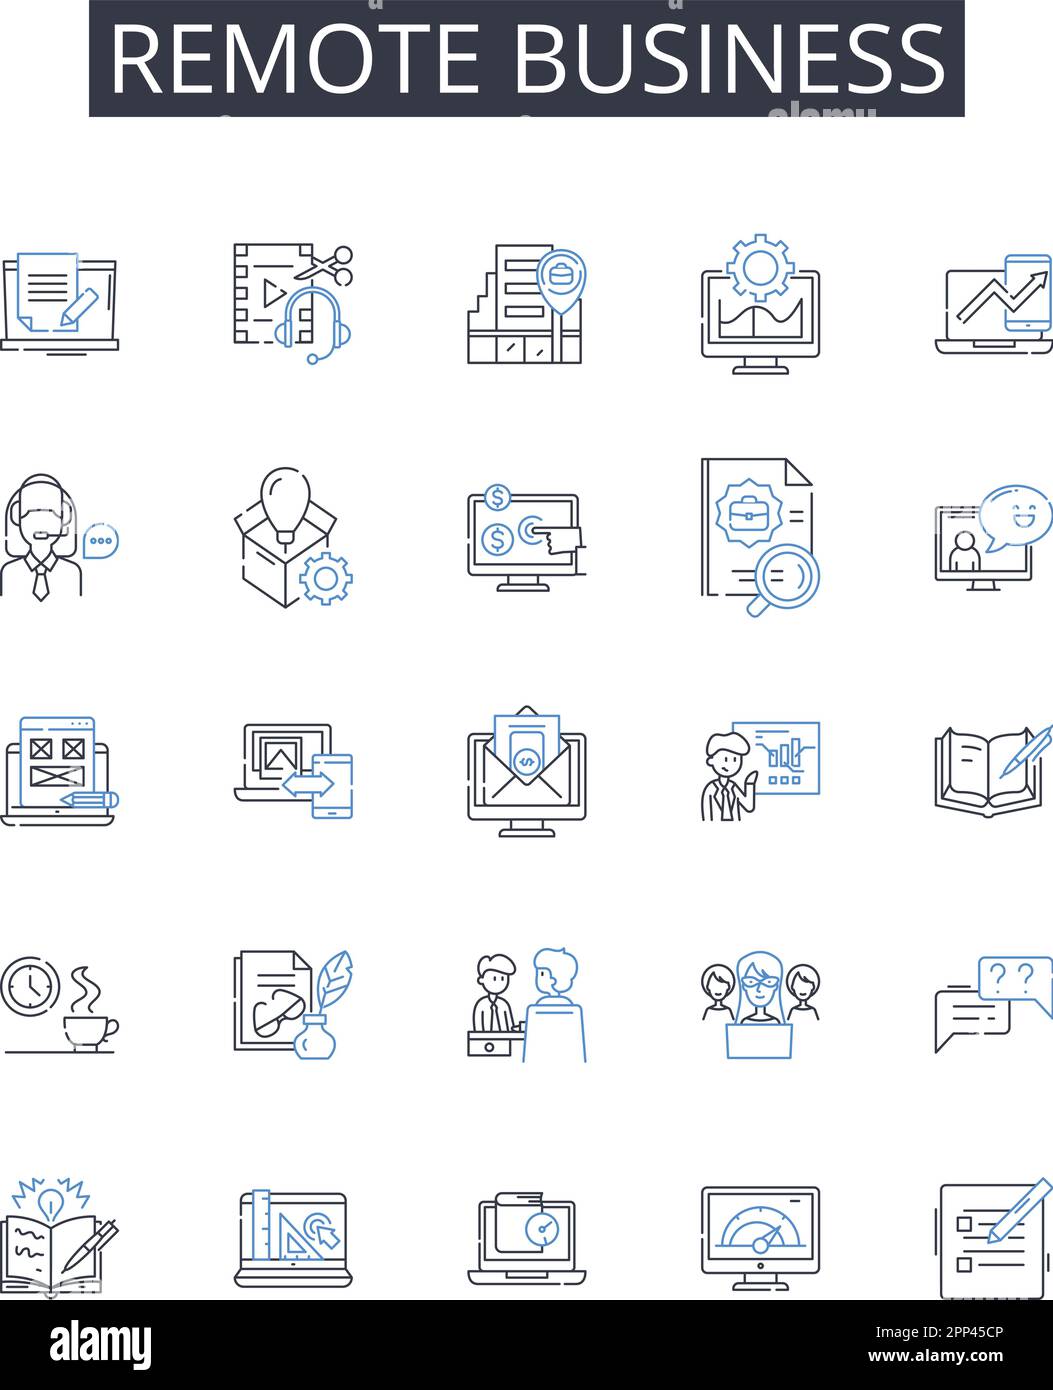 Remote business line icons collection. Retention, Acquisition, Analysis, Loyalty, Engagement, Segmentation, Personalization vector and linear Stock Vector